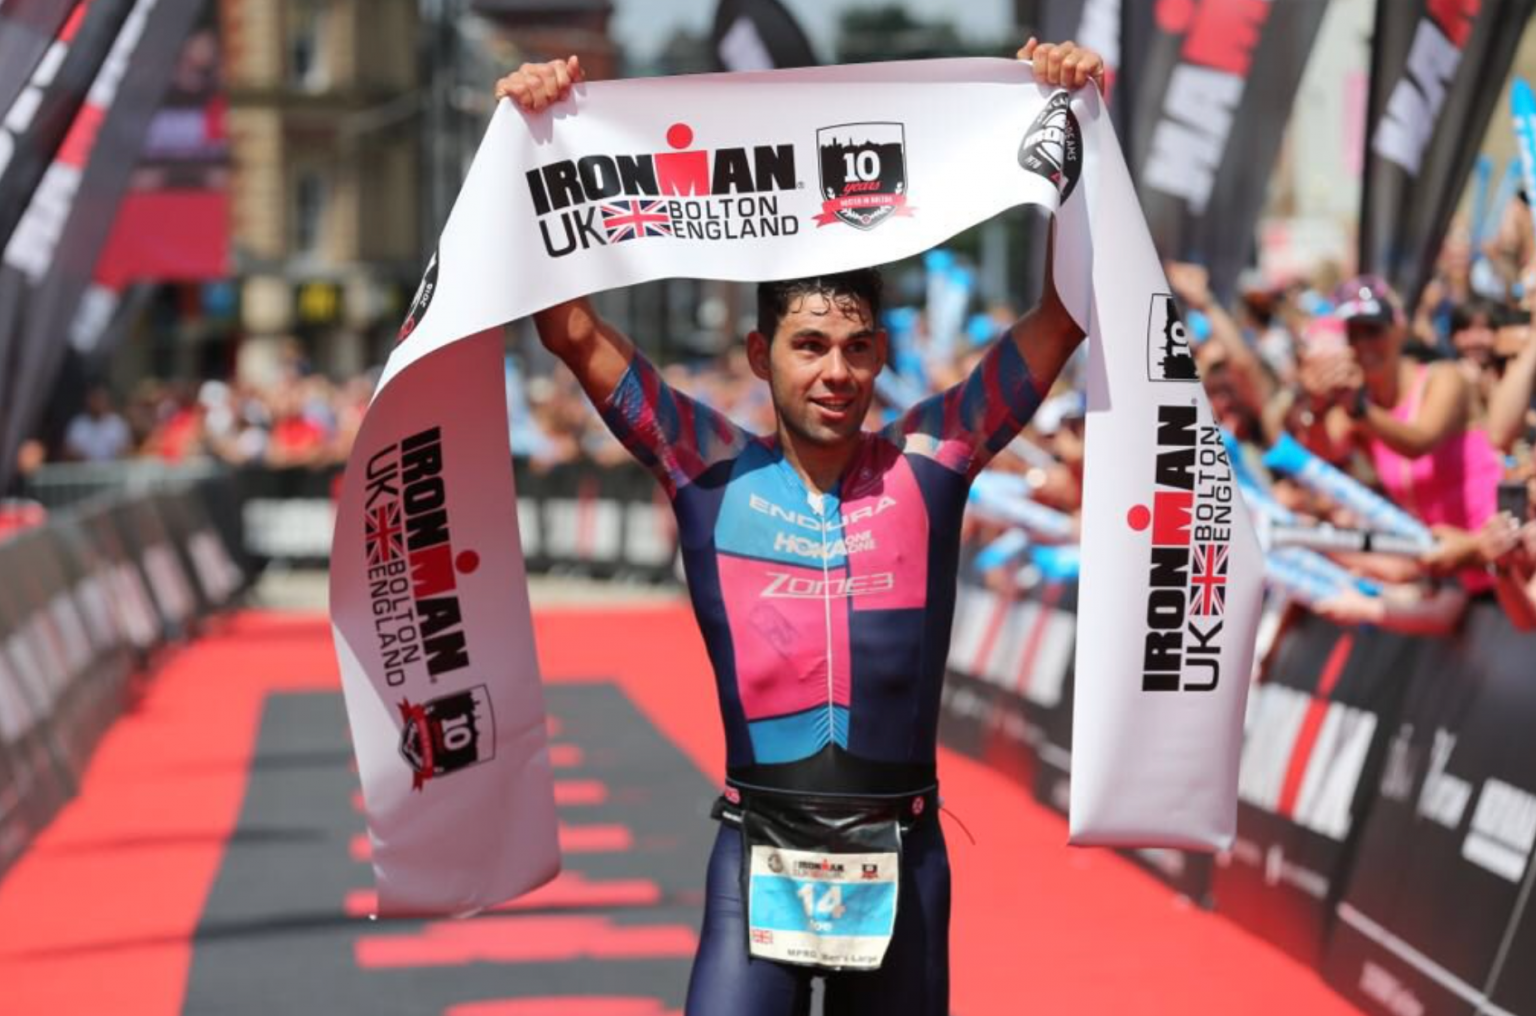 Ironman UK attracts pro athletes with 100,000 dollar prize purse